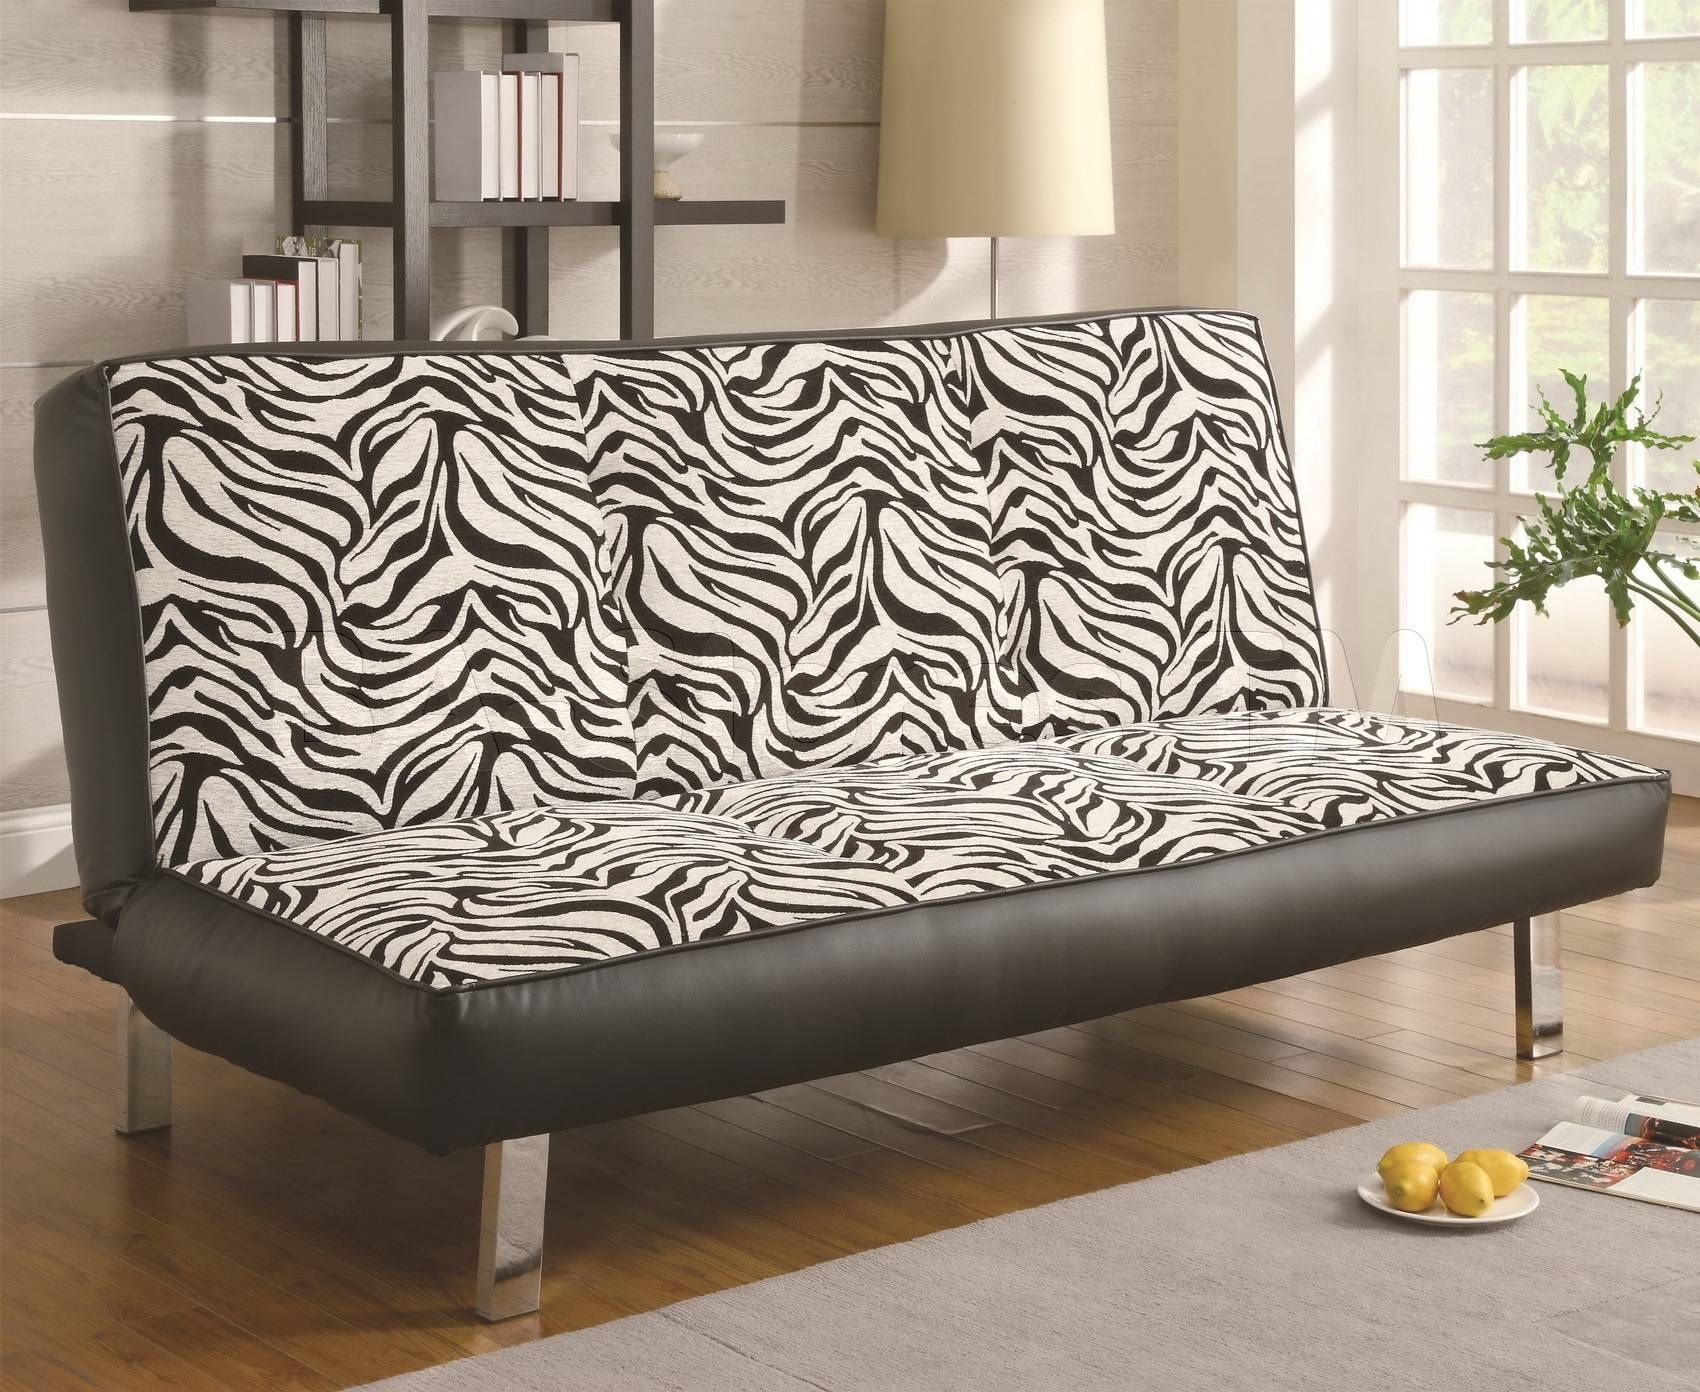 Sitting Pretty: 6 Sofa Bed Designs To Complete Your Living Room Inside Animal Print Sofas (Photo 8 of 15)